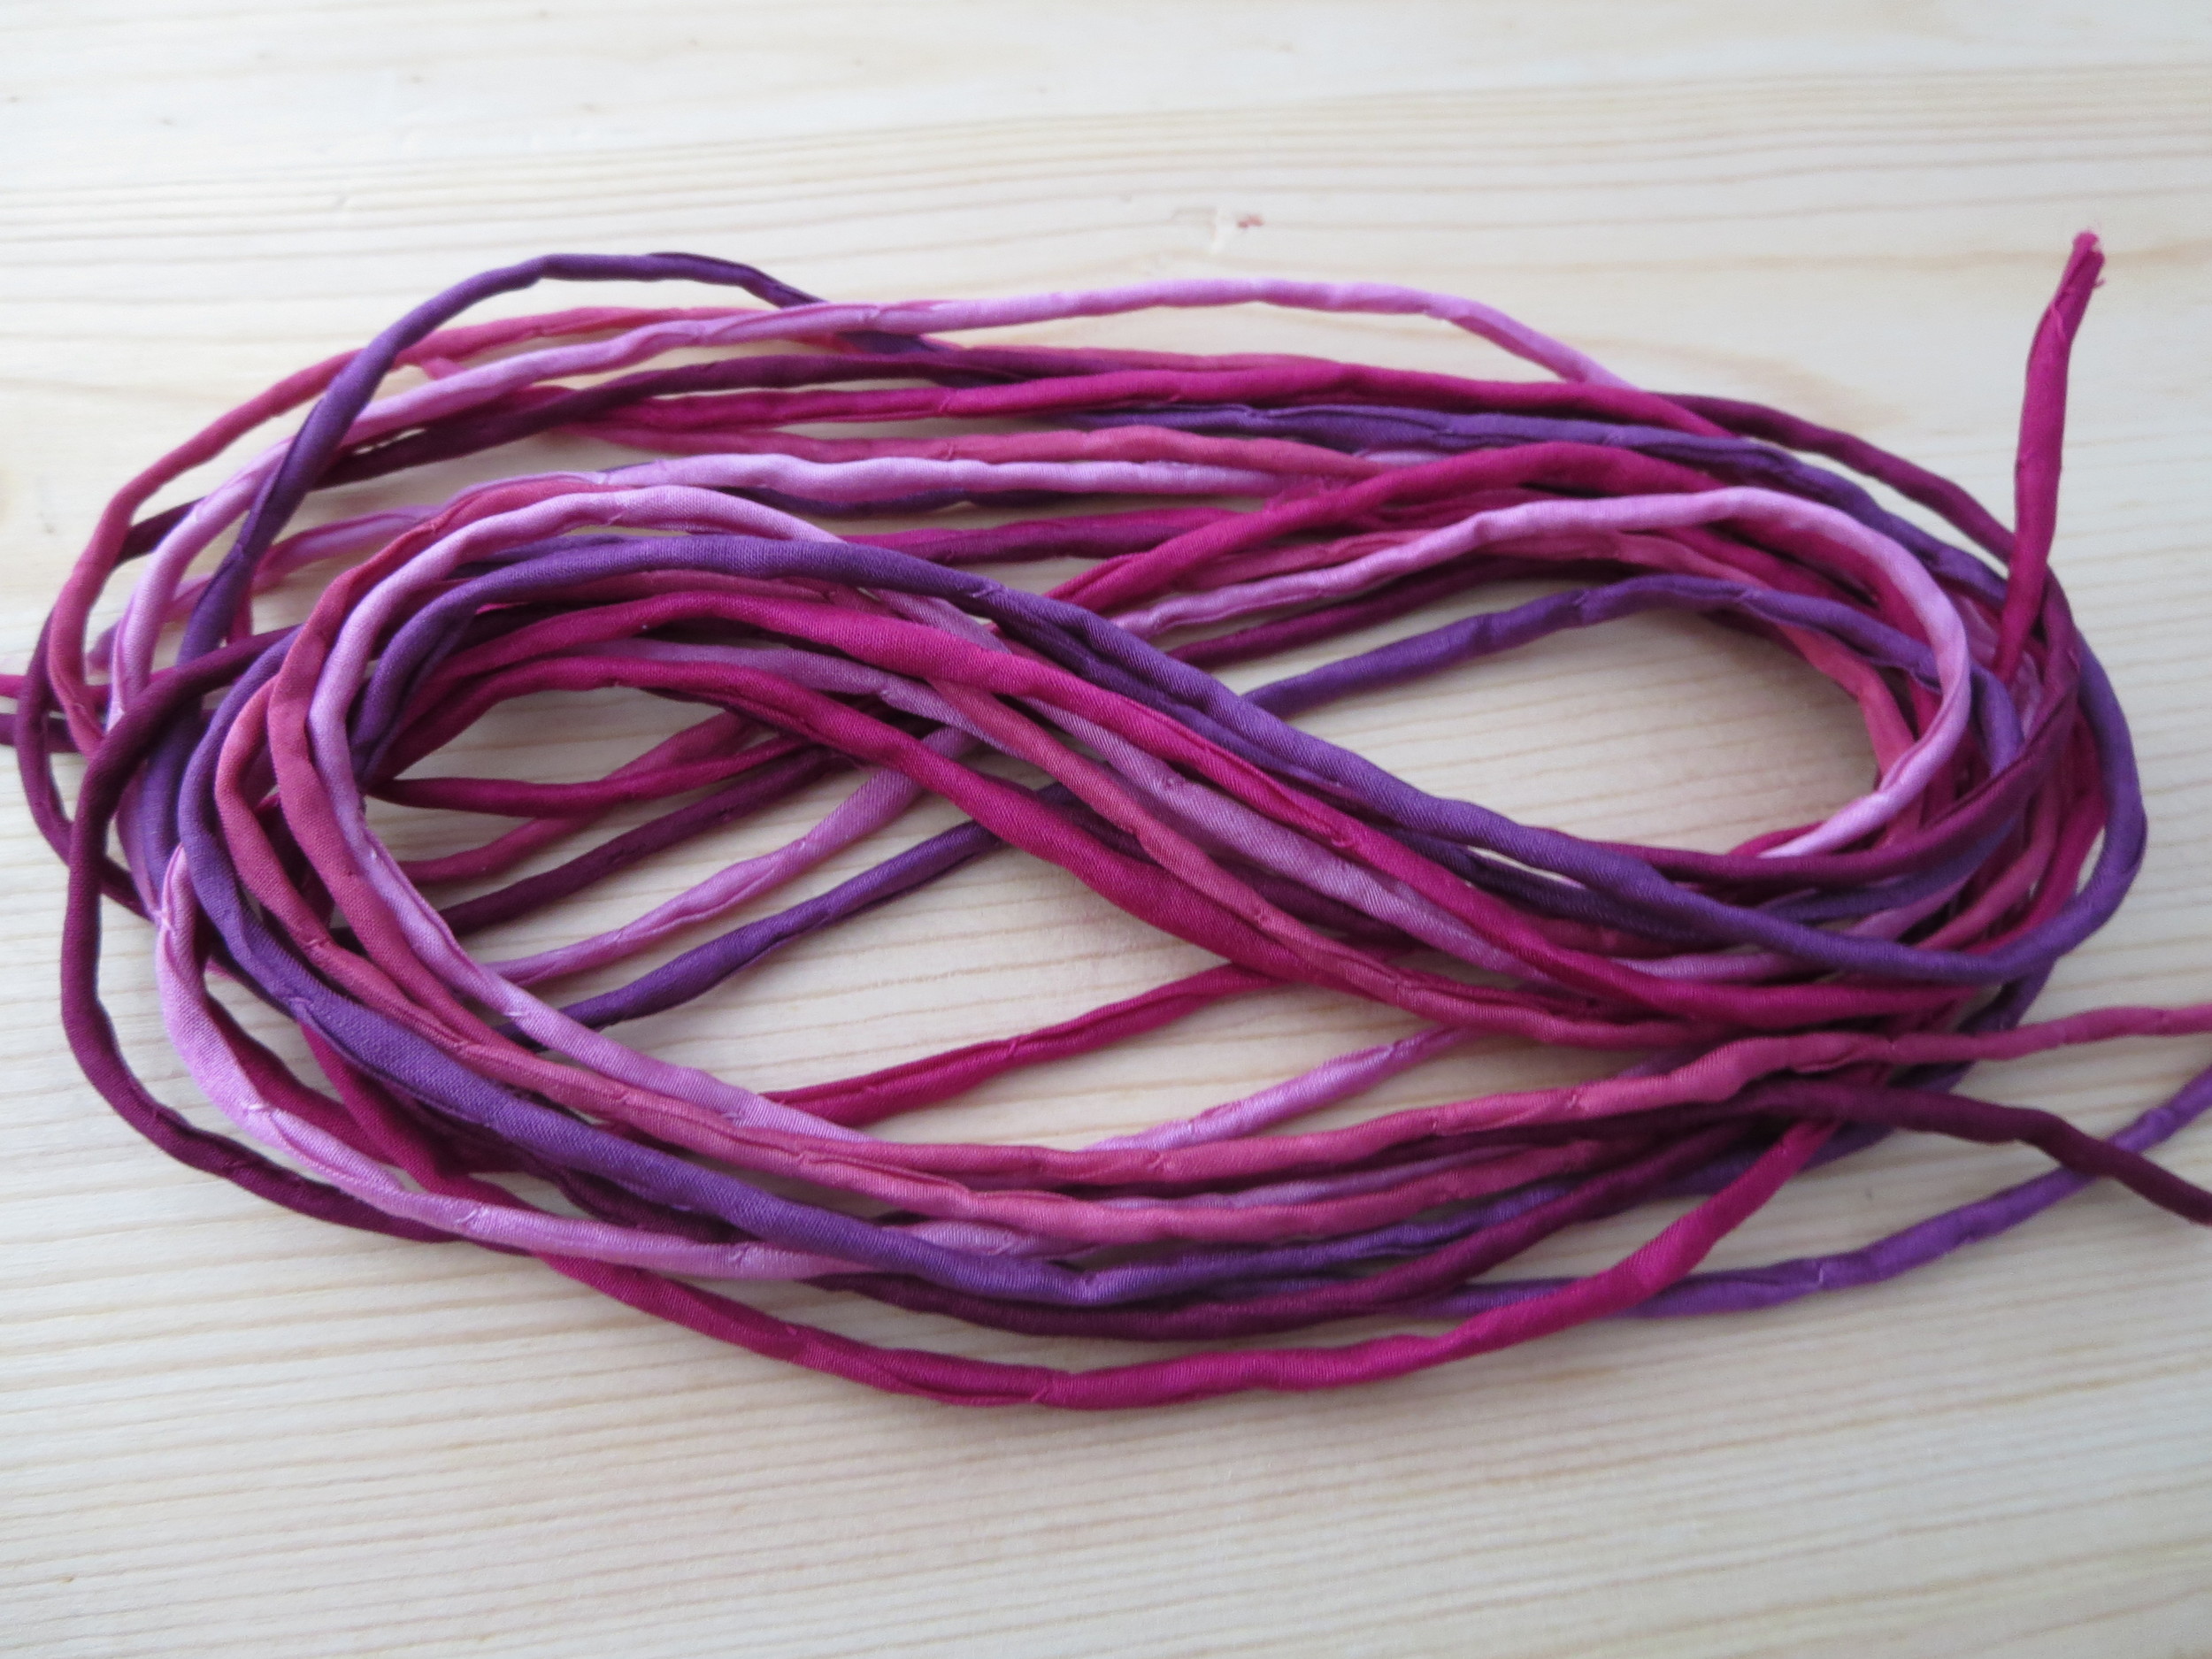 Hand Dyed Silk Cords Strings Wholesale Bulk 2mm 3mm